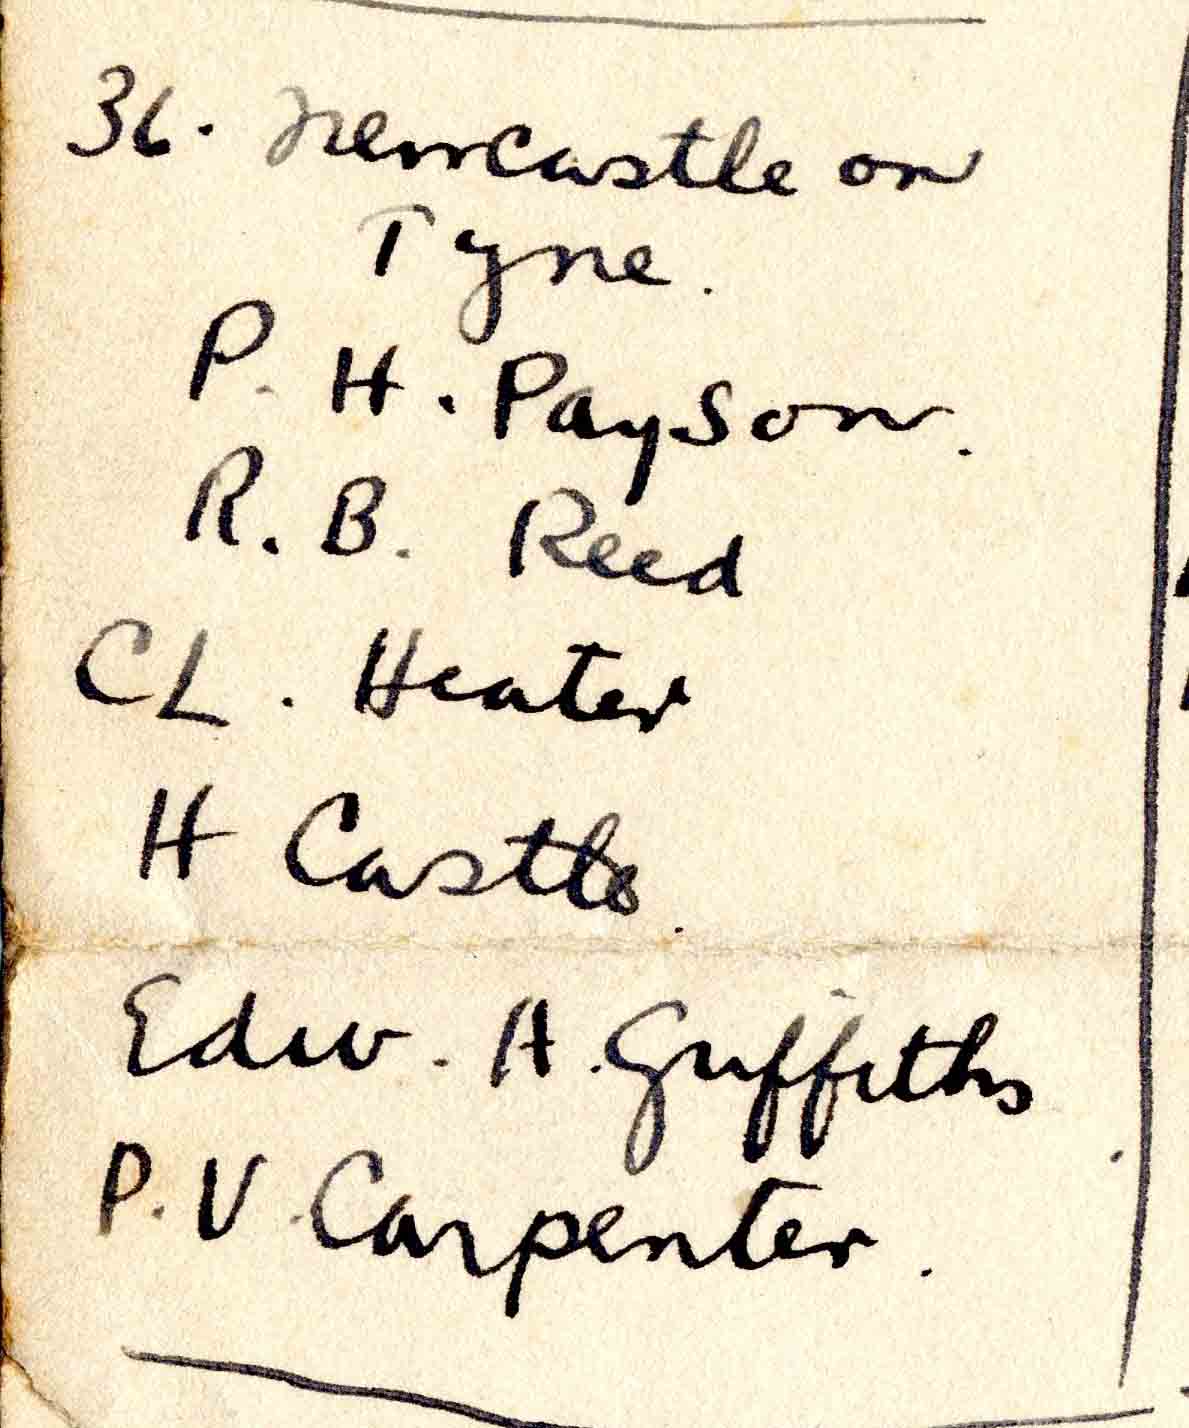 A handwritten list headed "36. Newcastle on Tyne" with the names Payson, Reed, Heater, Castle, Griffiths, Carpenter.